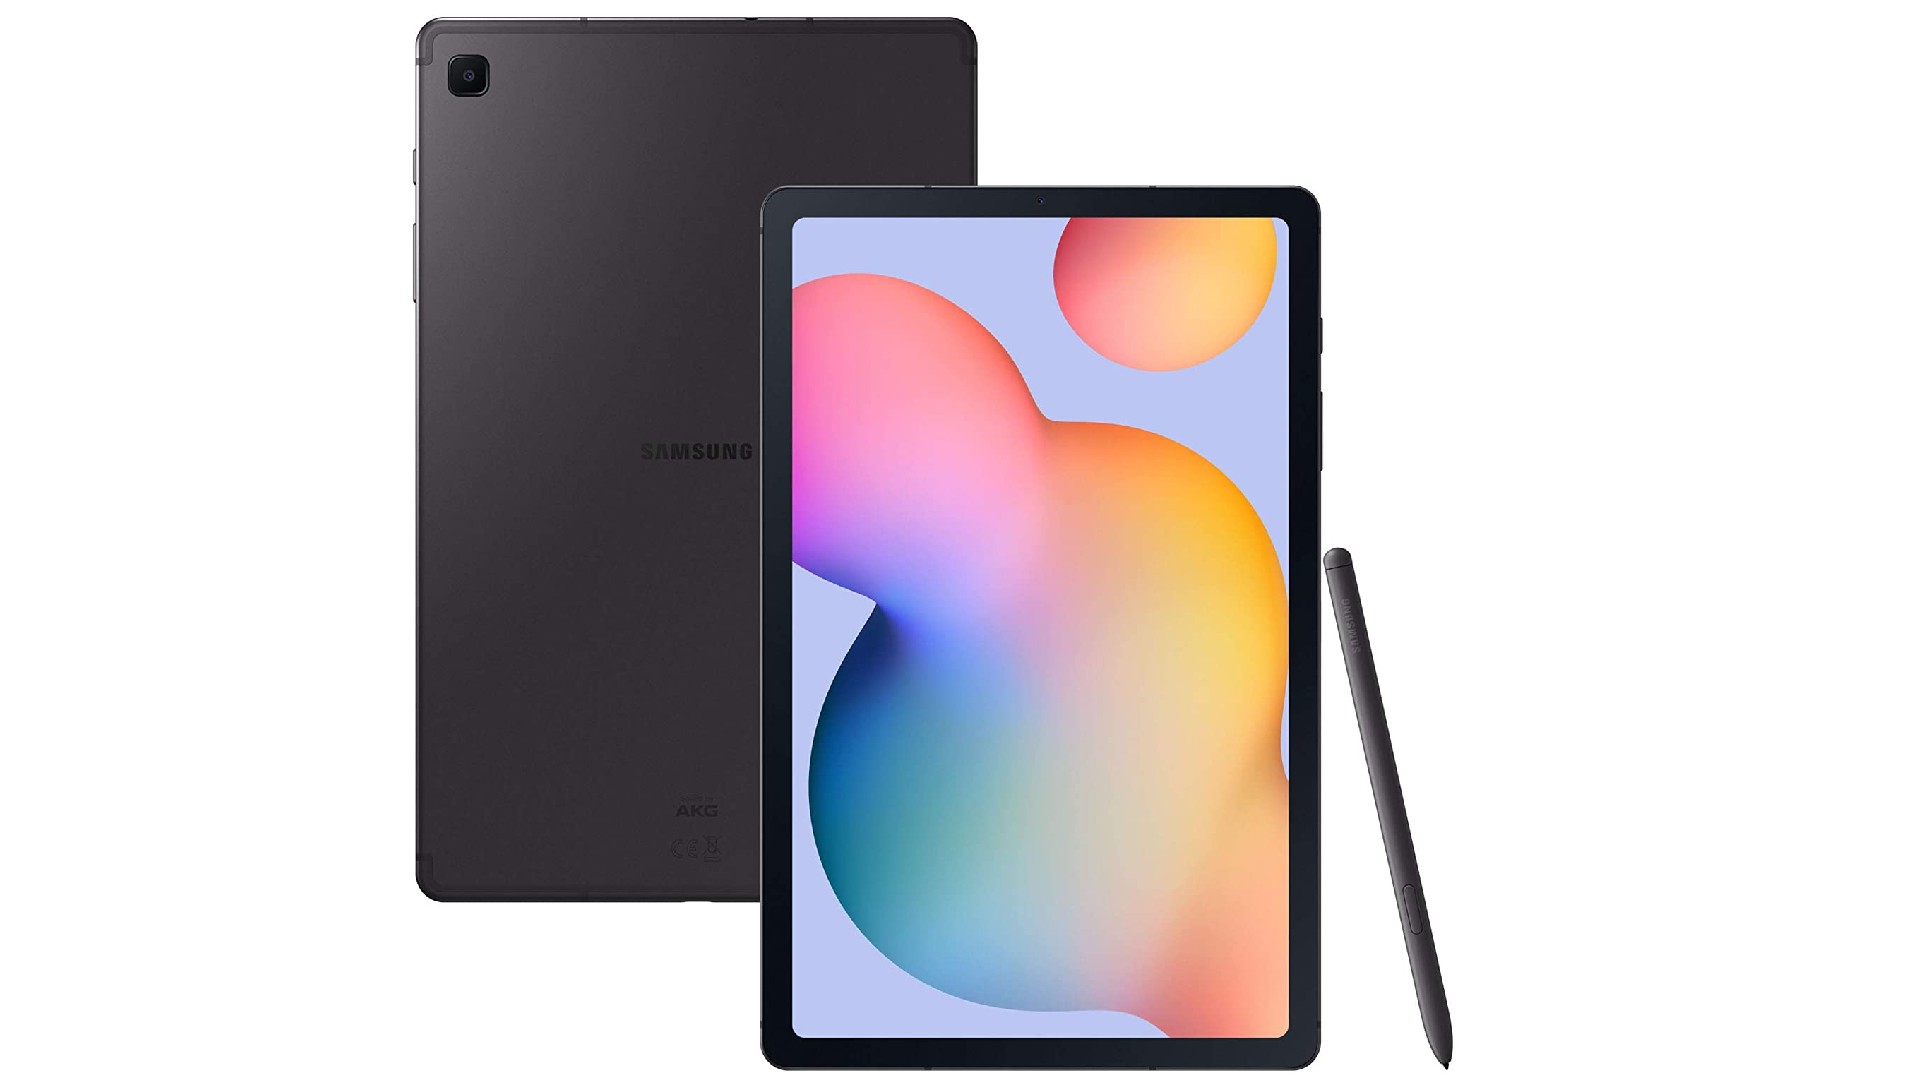 Samsung Galaxy Tab S6 Lite, one of the best Android tablets